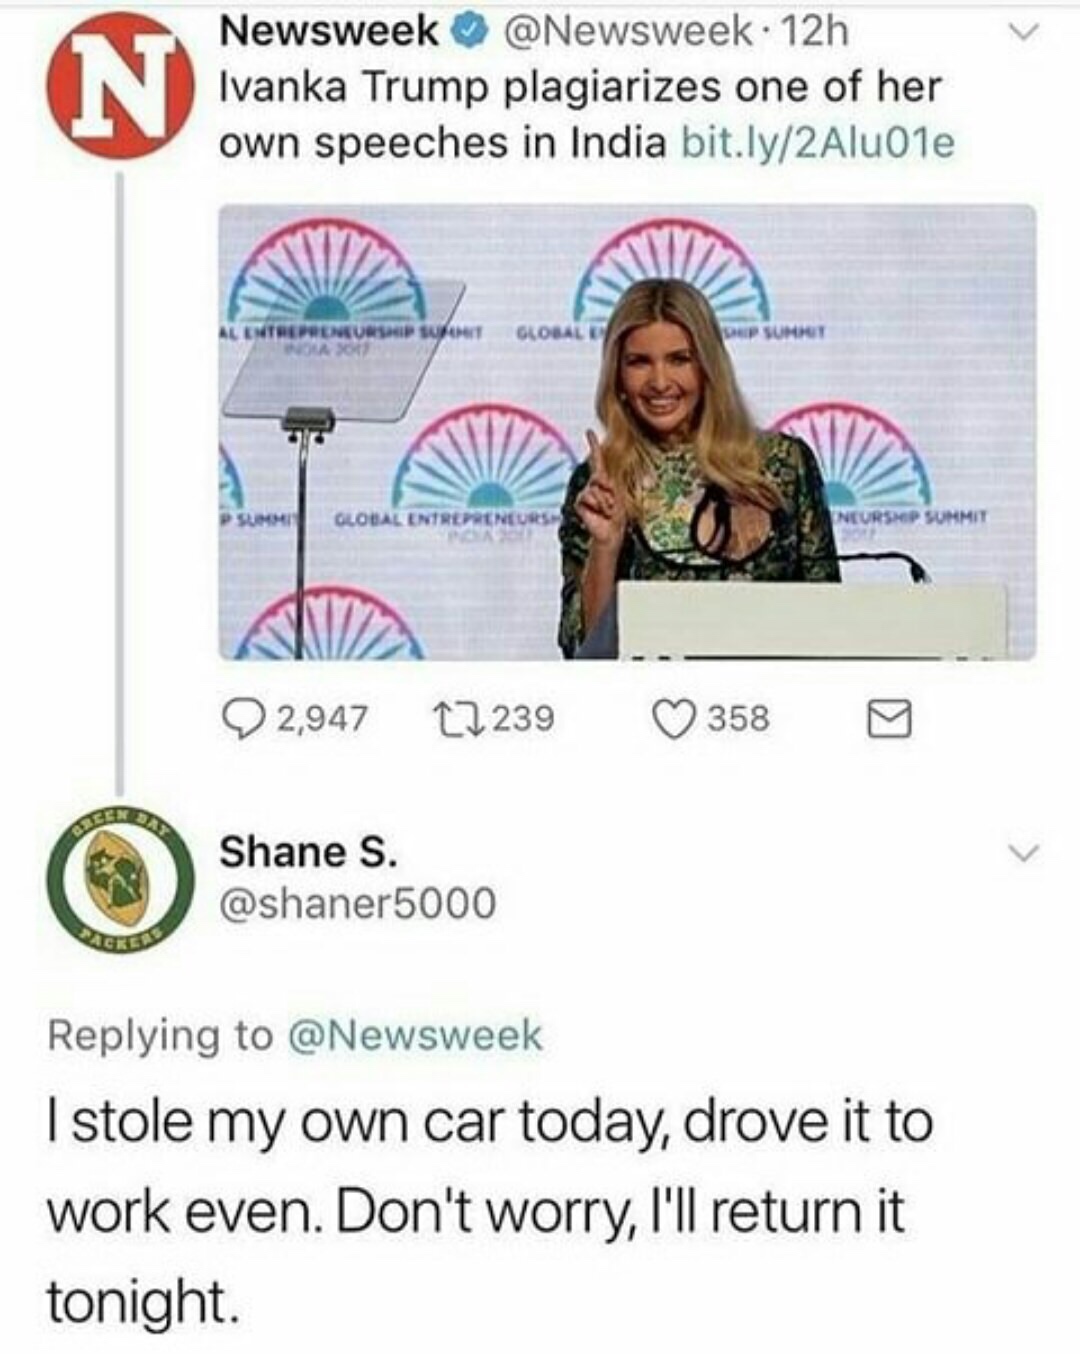 media - Newsweek . 12h Ivanka Trump plagiarizes one of her own speeches in India bit.ly2Alu01e Entrepreneurship T Olog Ep Sumo G Neurship Summit 2,947 27239 3580 O Shane S. Shame I stole my own car today, drove it to work even. Don't worry, I'll return it